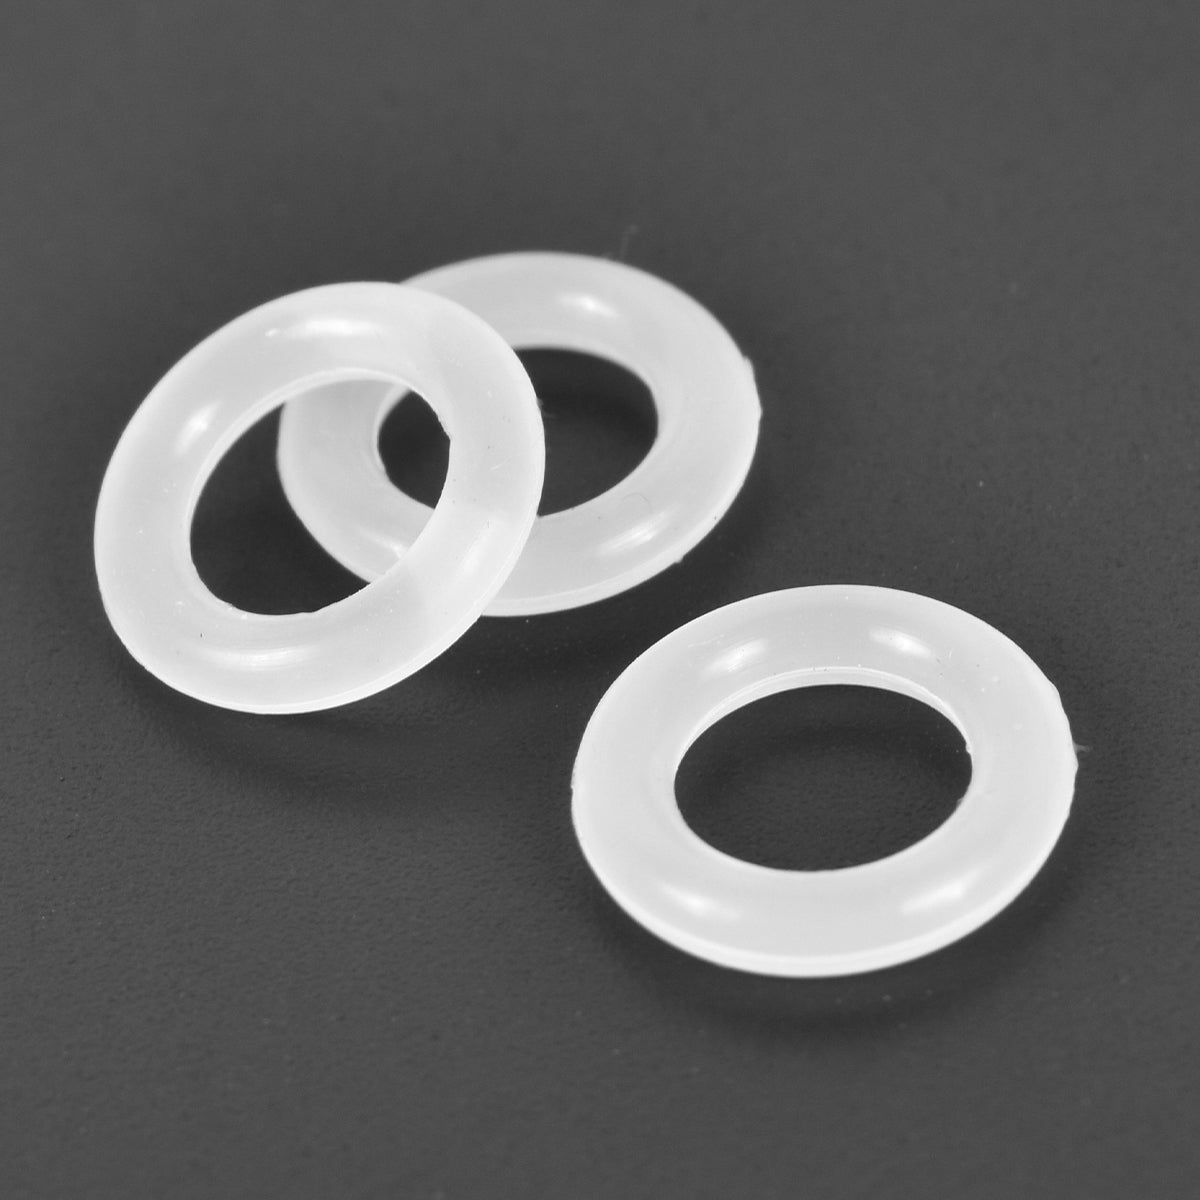 6Pcs/lot Silica Gel Washer Seals White Silicon Dia. 12mm Thickness 2.4mm Rubber O-rings Sealing Gasket For Xenon Krypton Lamp